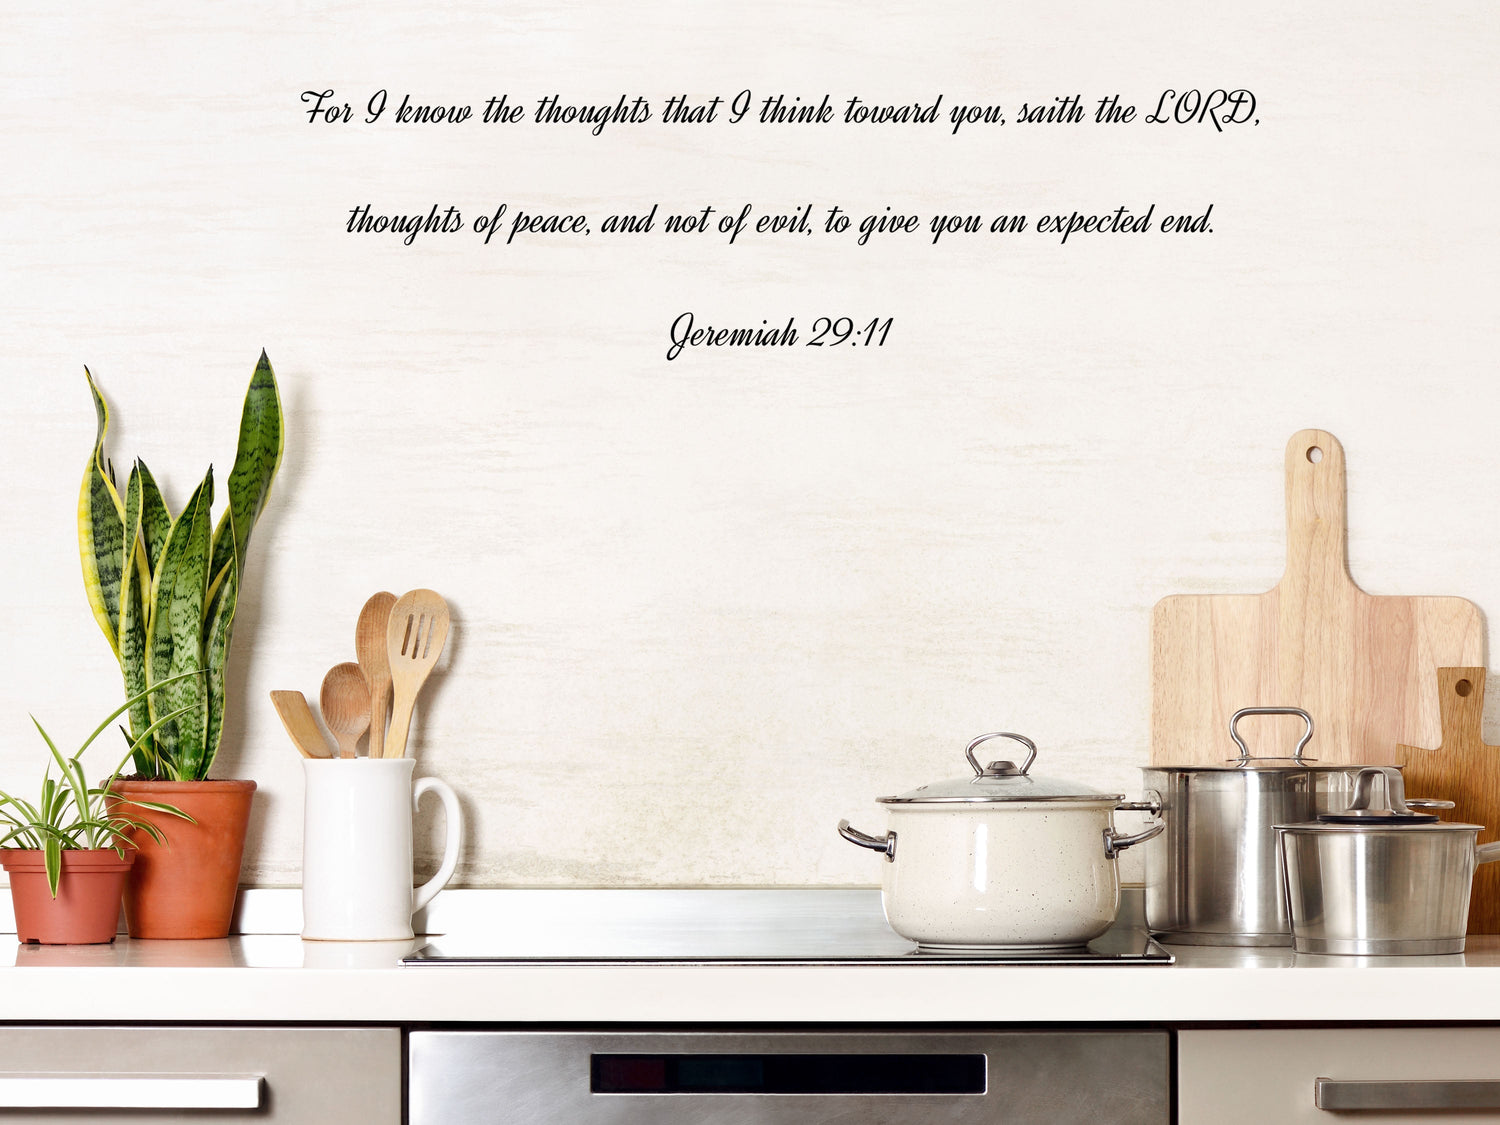 Jeremiah 29:11 Wall Inspirational Decal Quote Vinyl Wall Decal Inspirational Wall Signs 